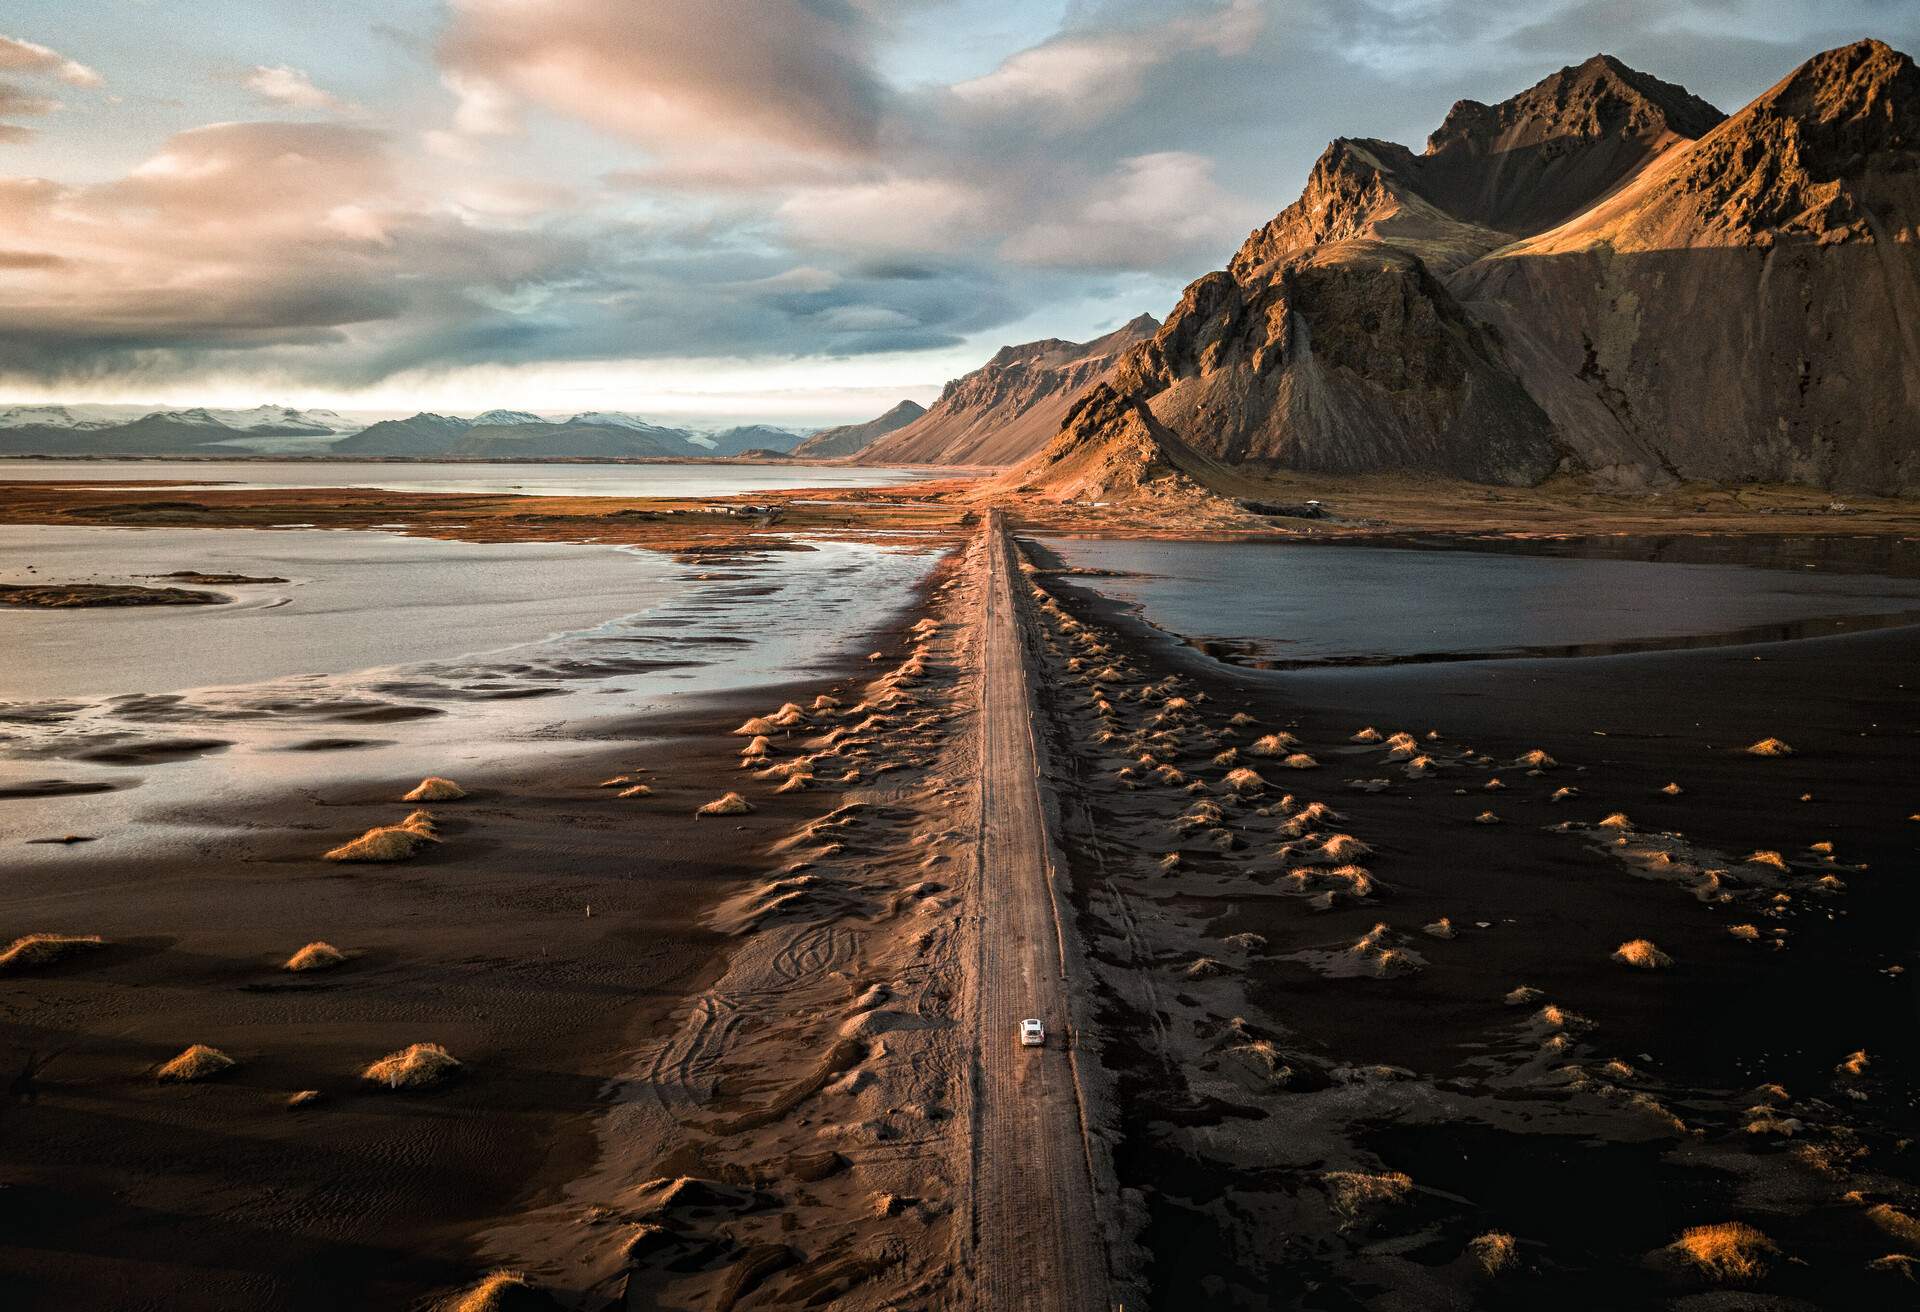 dest_iceland_ring-road_shutterstock_1636856710_universal_within-usage-period_80539